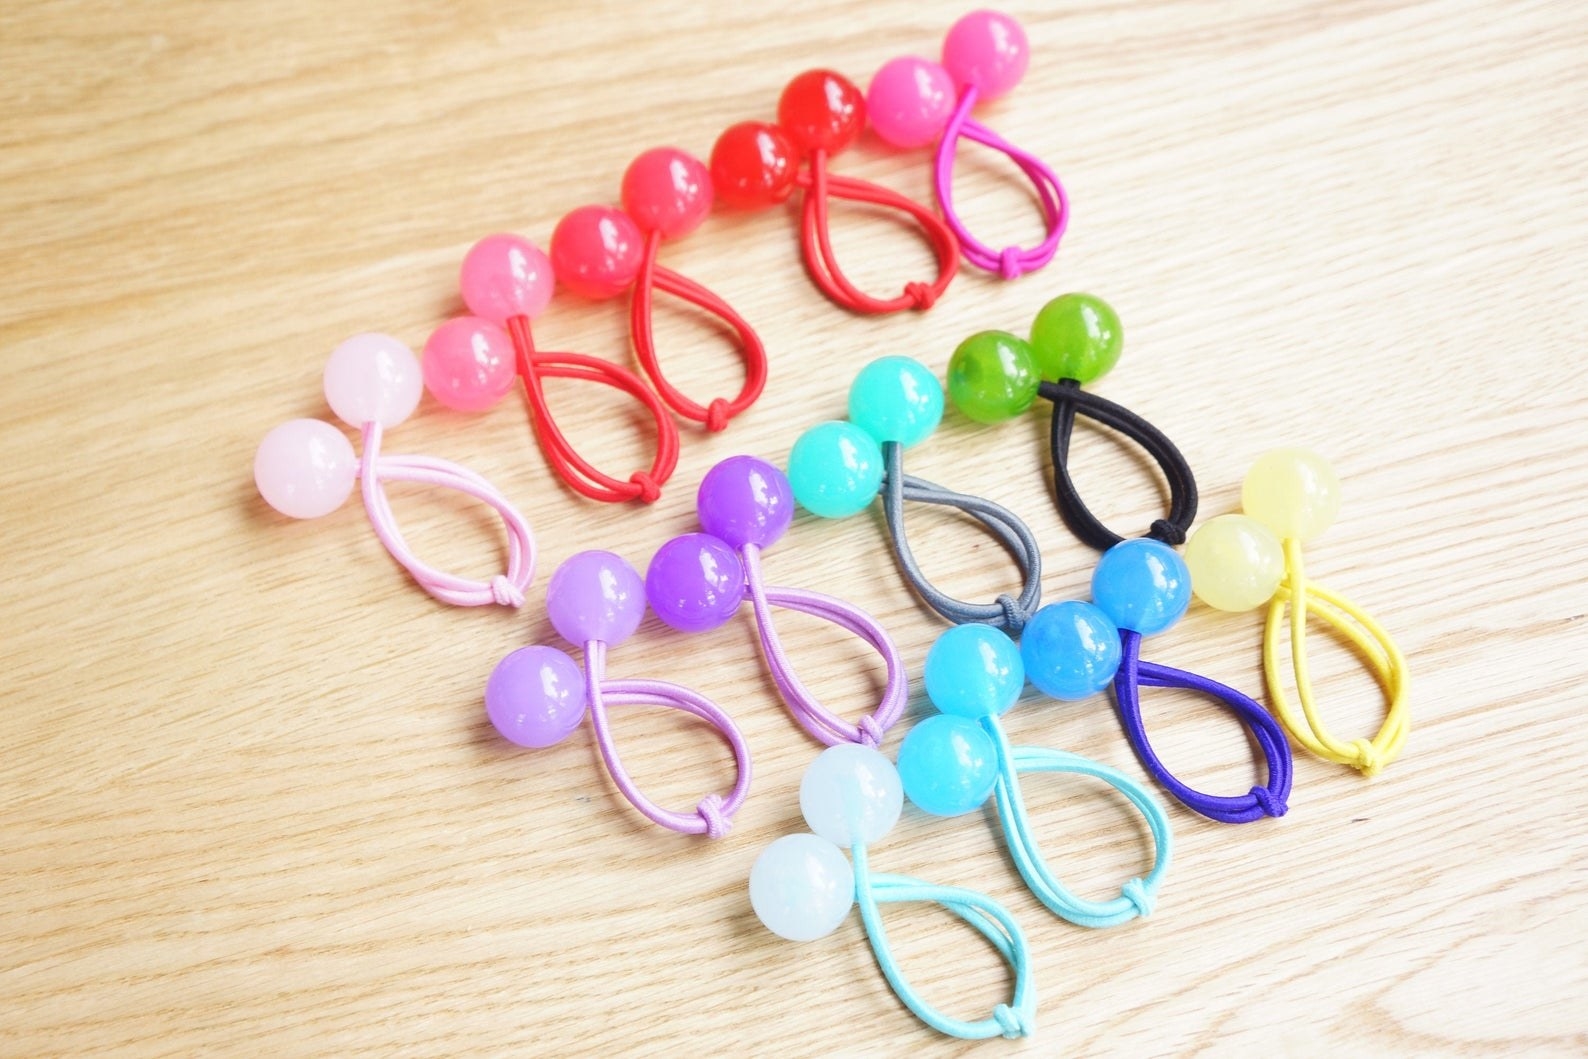 15 Hair Accessories That'll Make 2000s Girls Nostalgic For Their Childhood